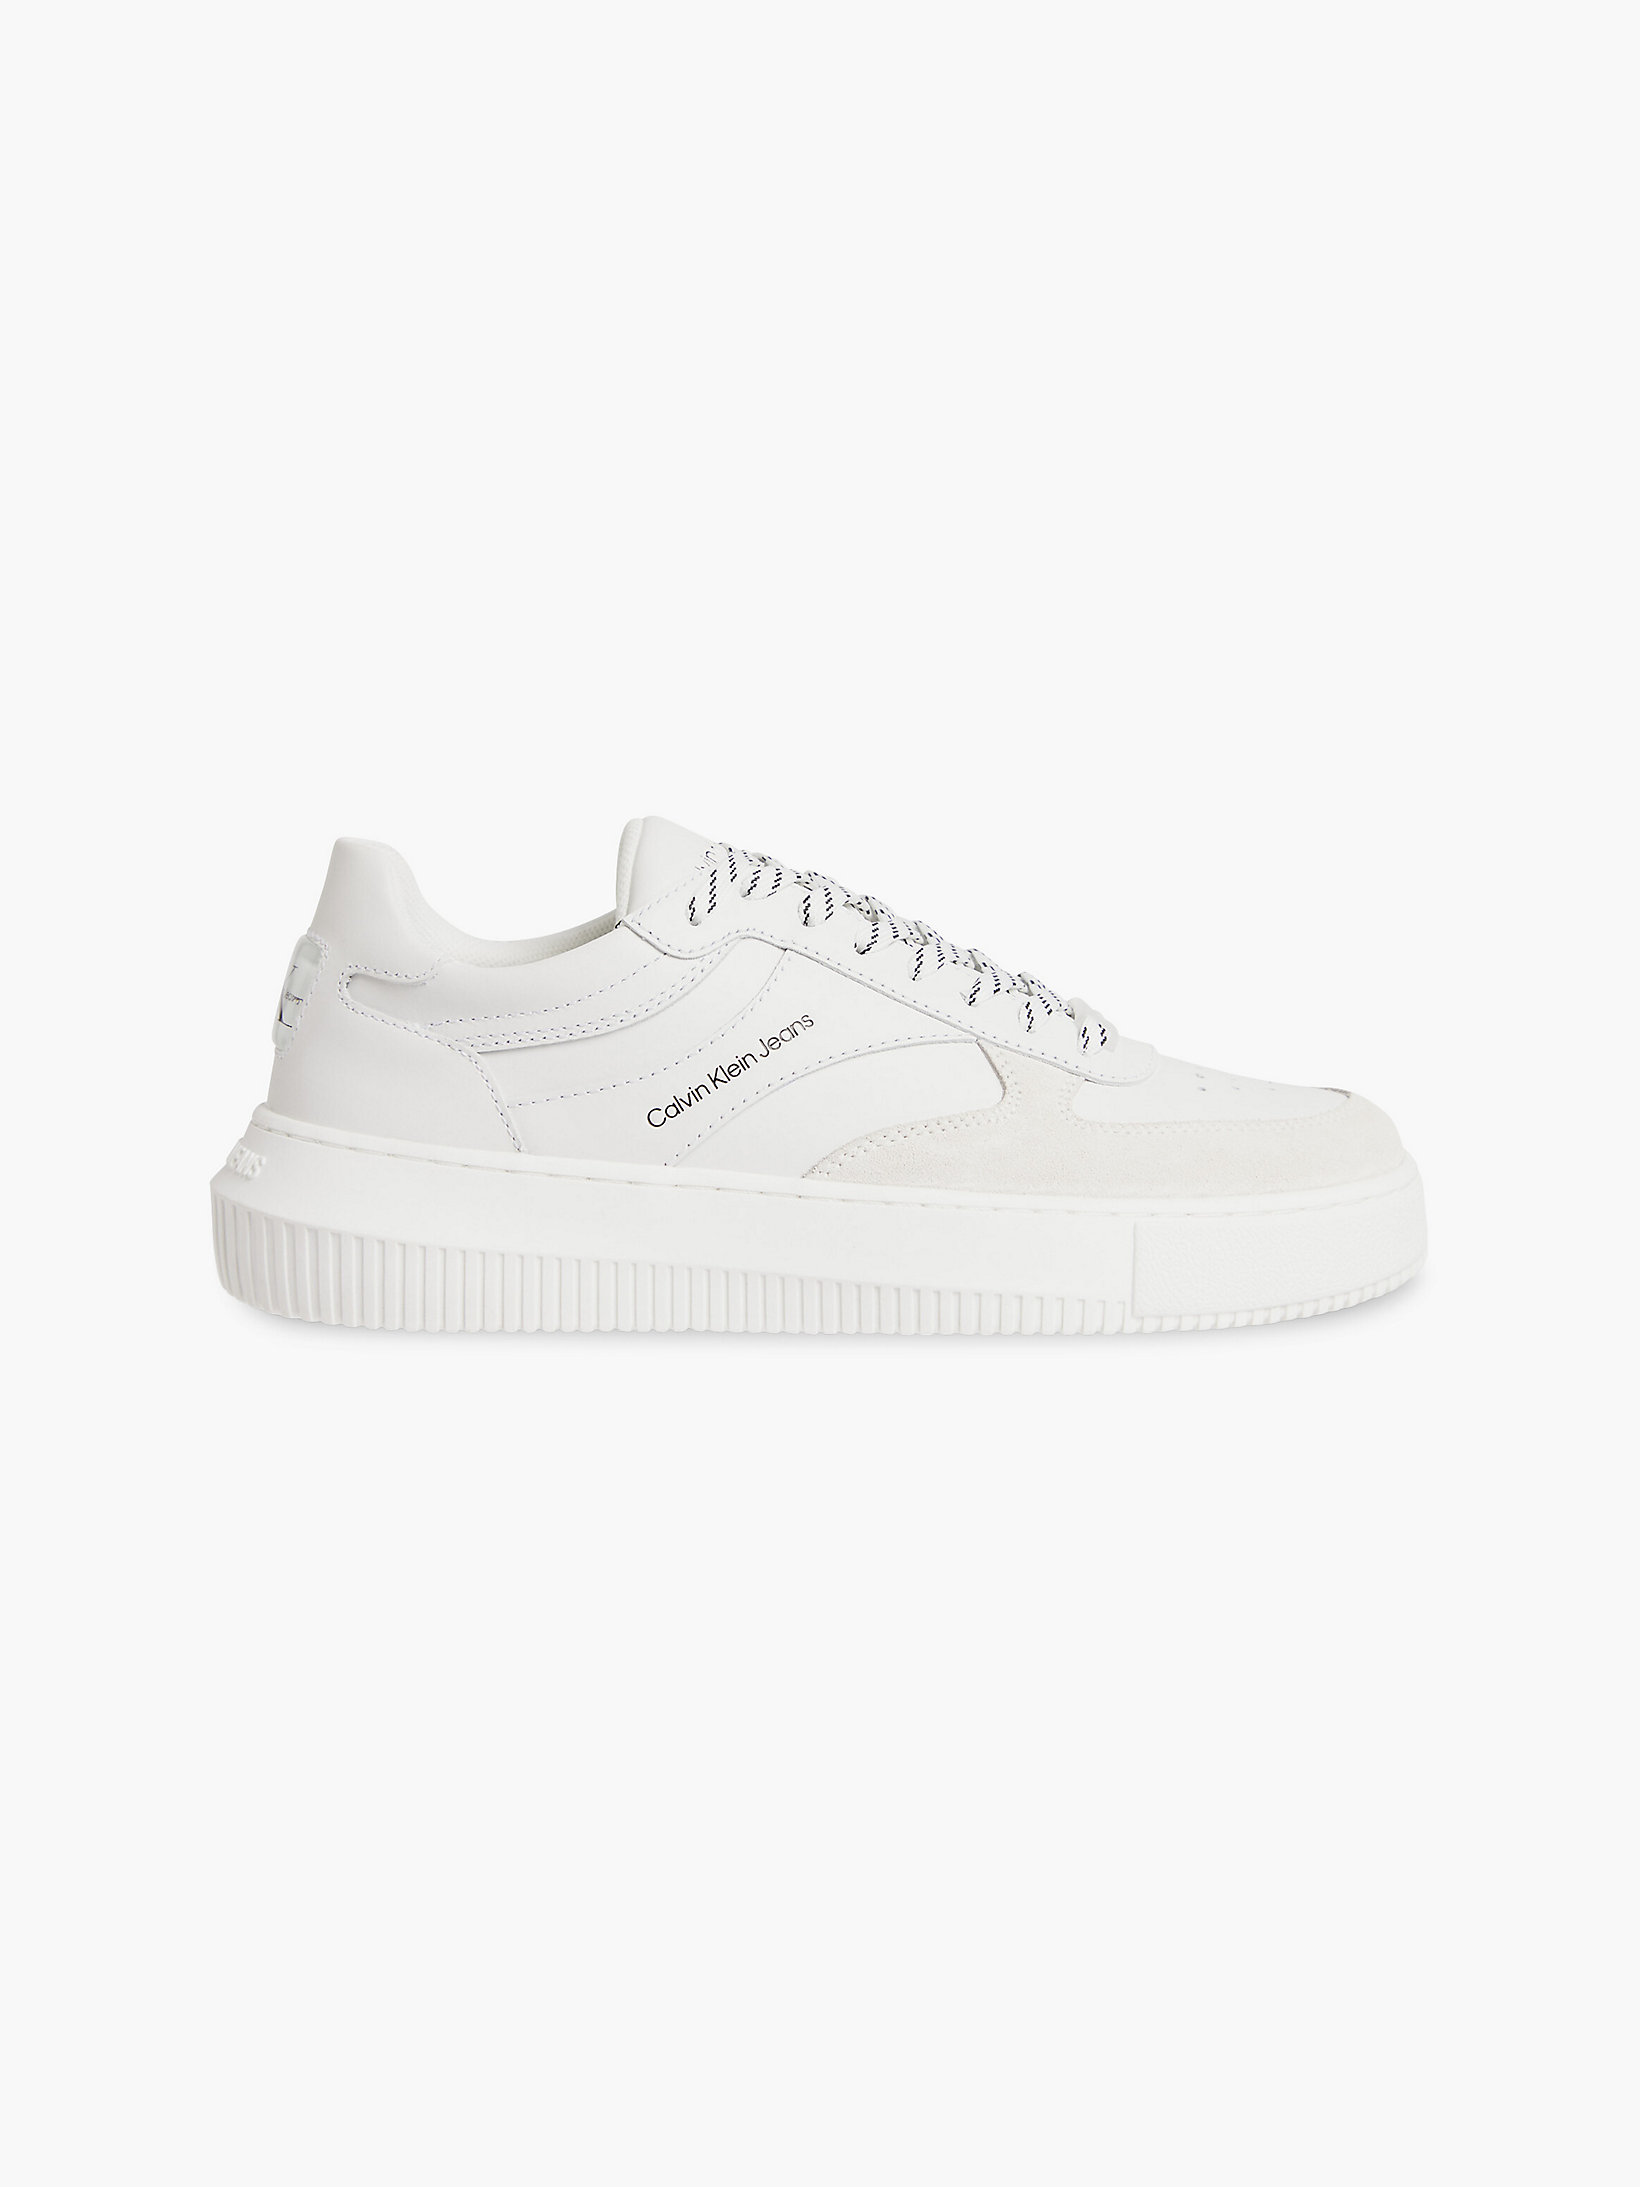 Bright White Leather Trainers undefined women Calvin Klein